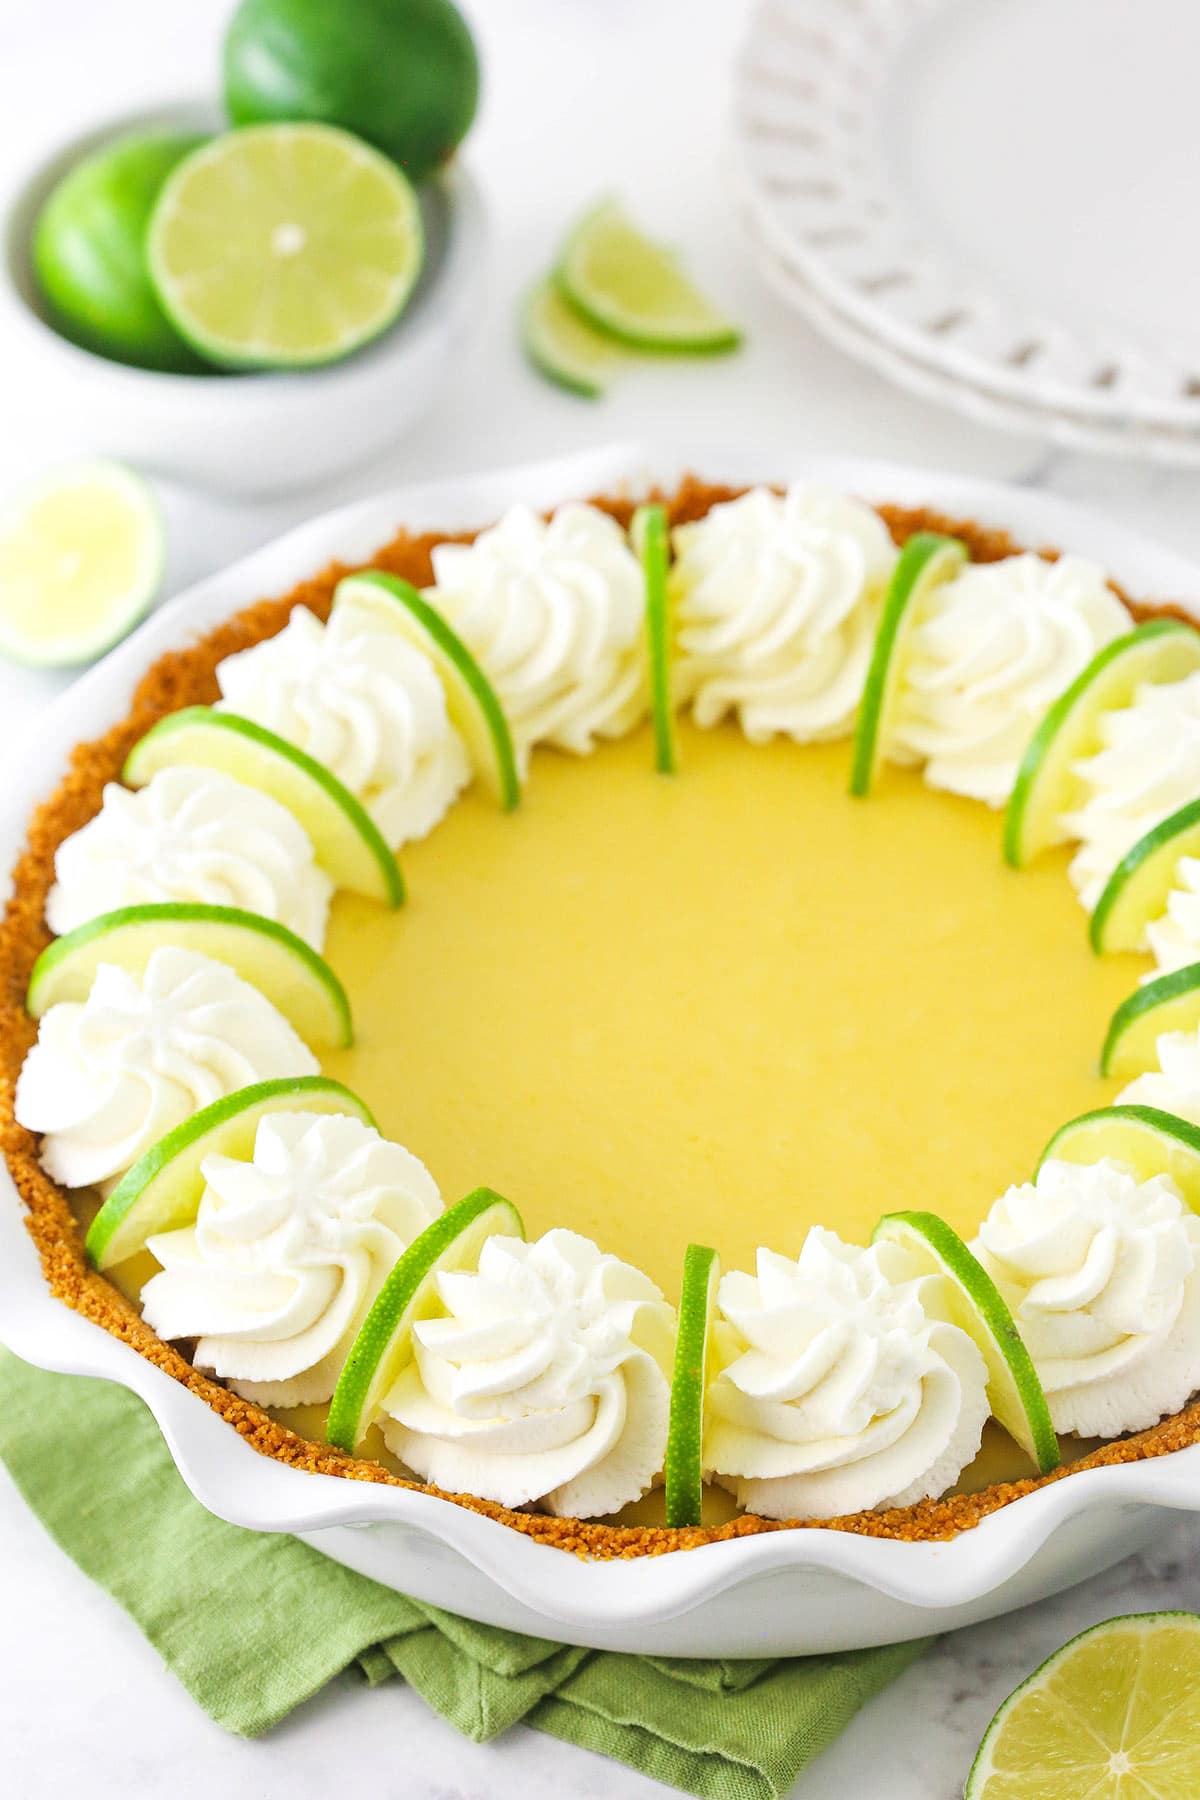 A homemade citrus pie inside of a pie dish with a green kitchen towel underneath the dish and swirls of whipped cream on top of the pie filling